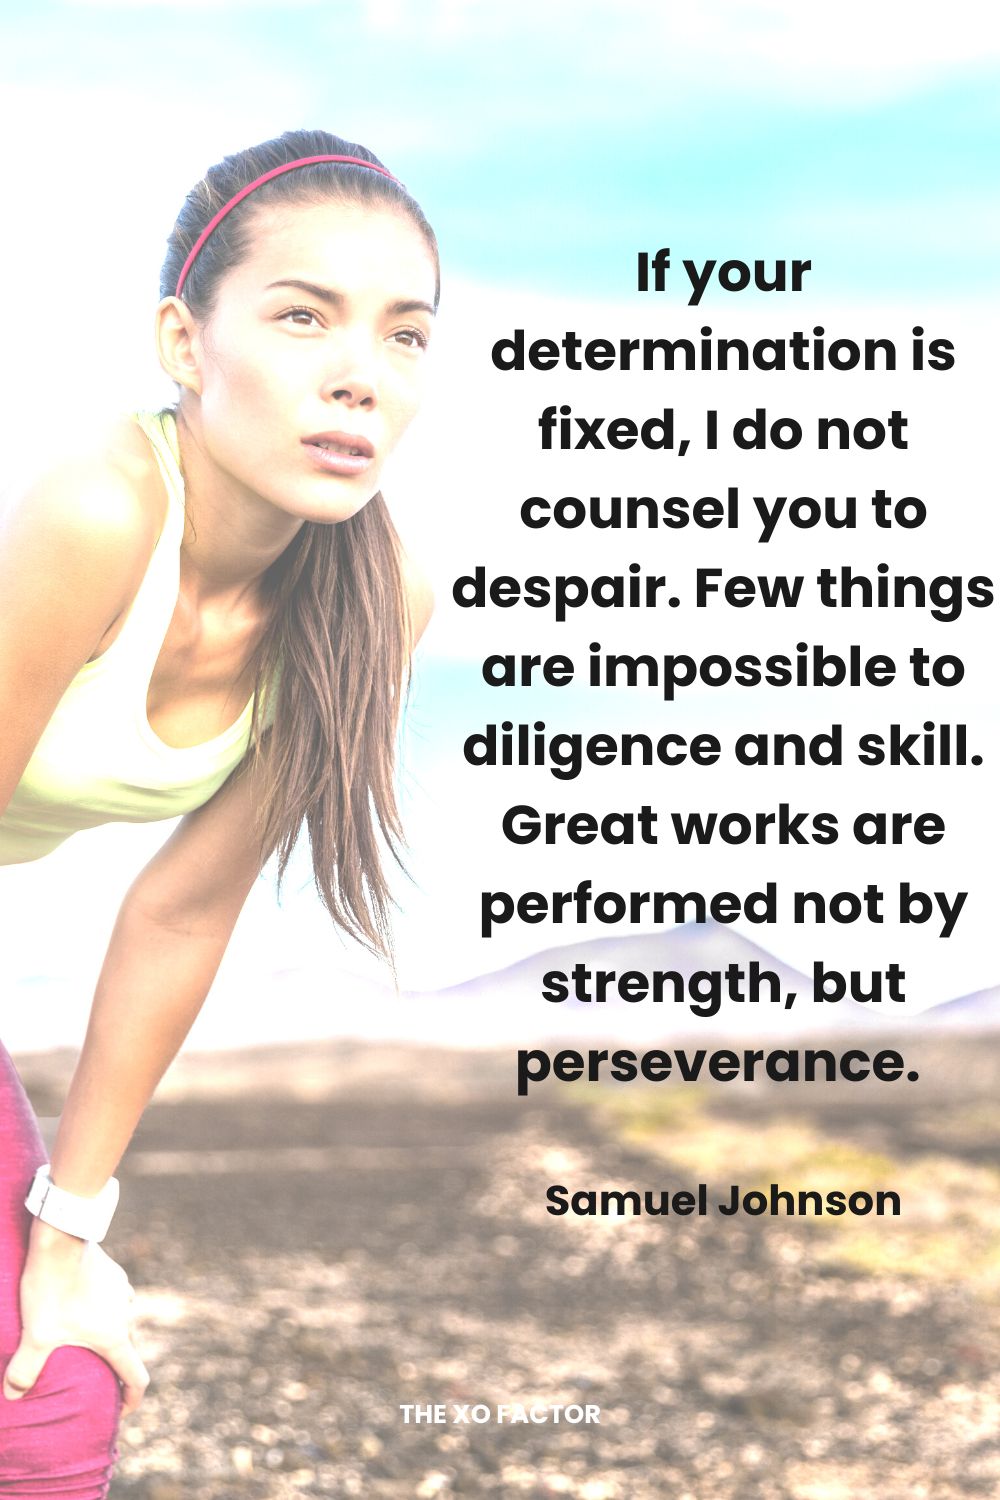 If your determination is fixed, I do not counsel you to despair.  Few things are impossible to diligence and skill.  Great works are performed not by strength, but perseverance. Samuel Johnson